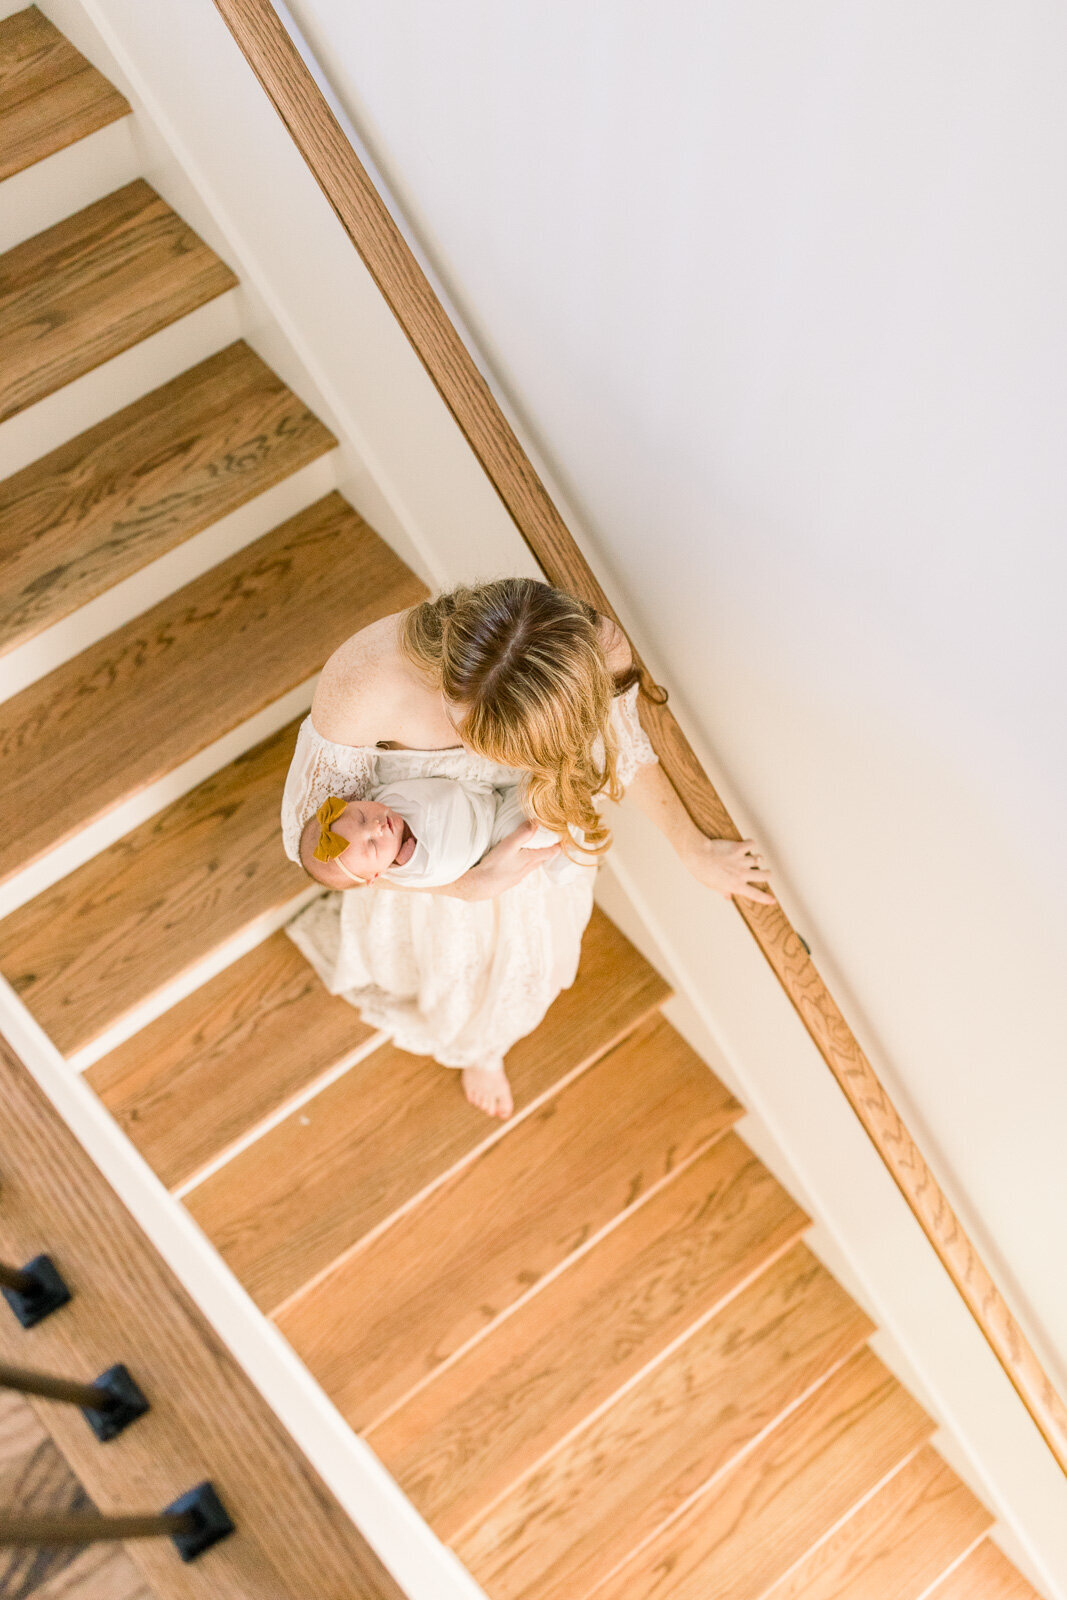 Mother walking down stairway with new baby